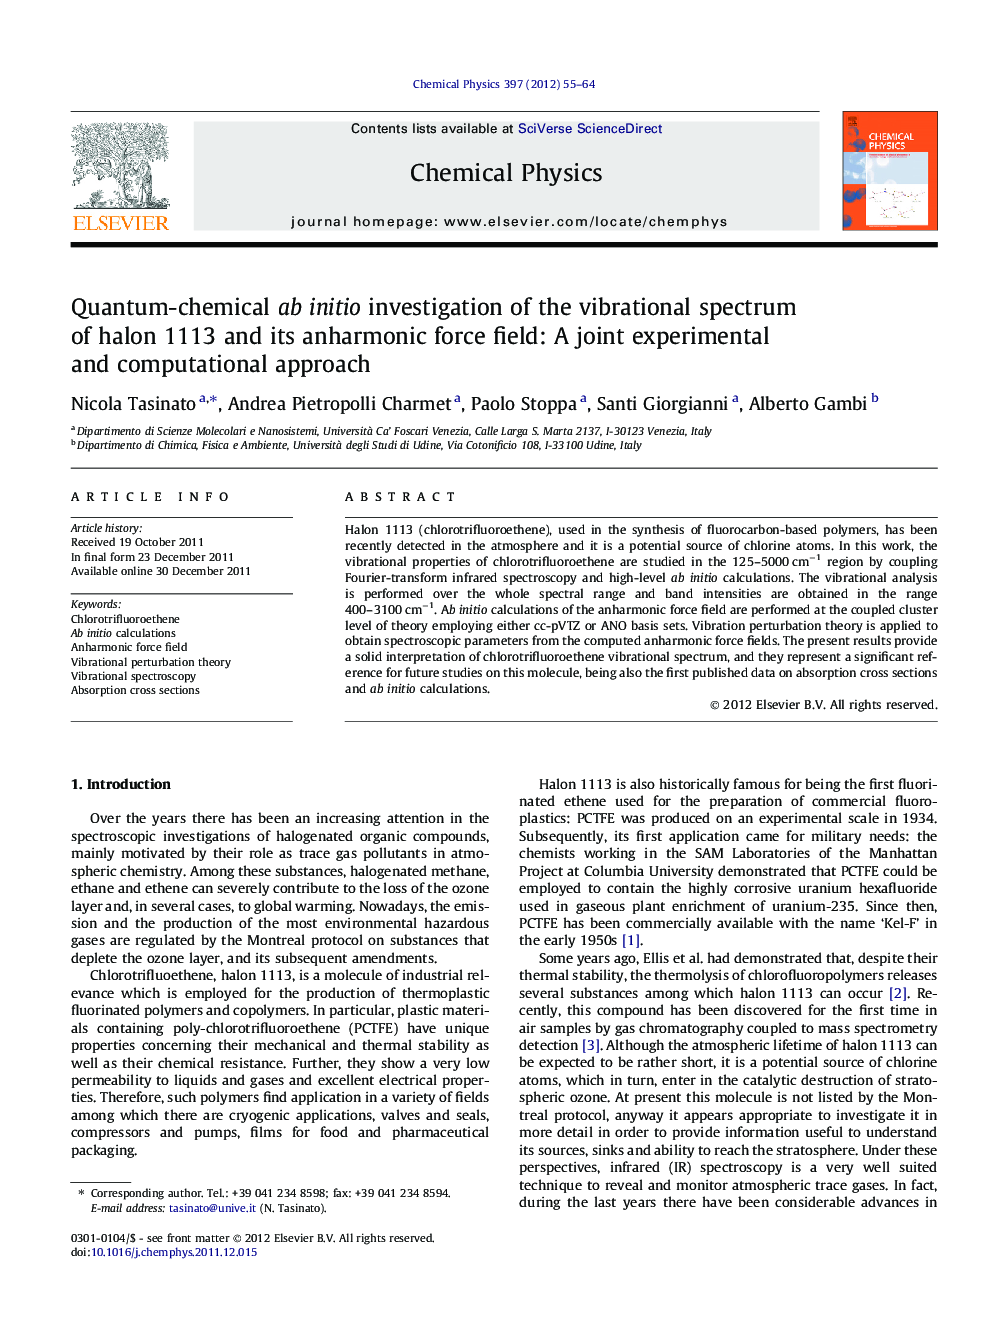 Quantum-chemical ab initio investigation of the vibrational spectrum of halon 1113 and its anharmonic force field: A joint experimental and computational approach